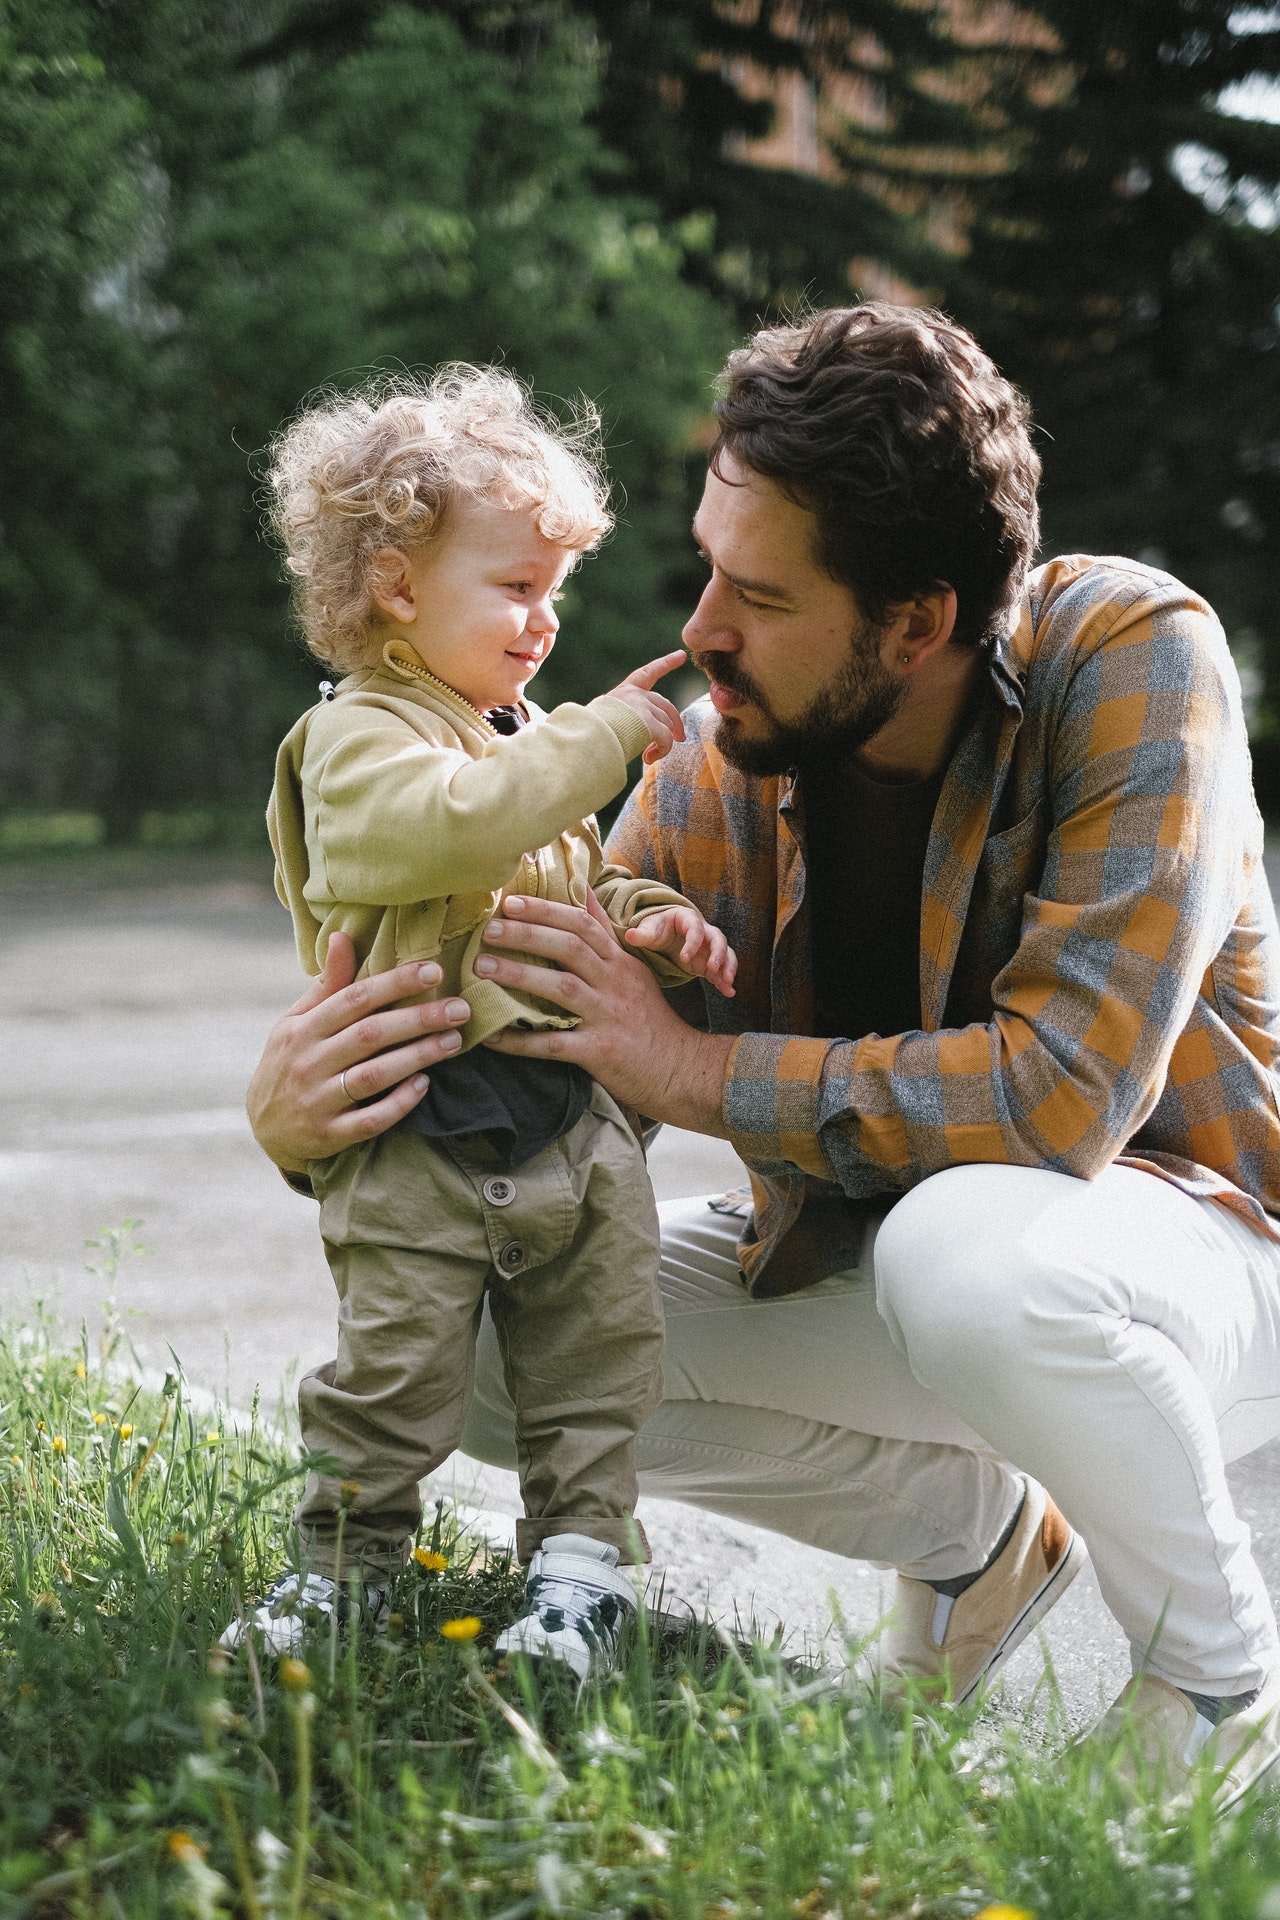 They let Patrick get close to his son and became good friends. | Source: Pexels